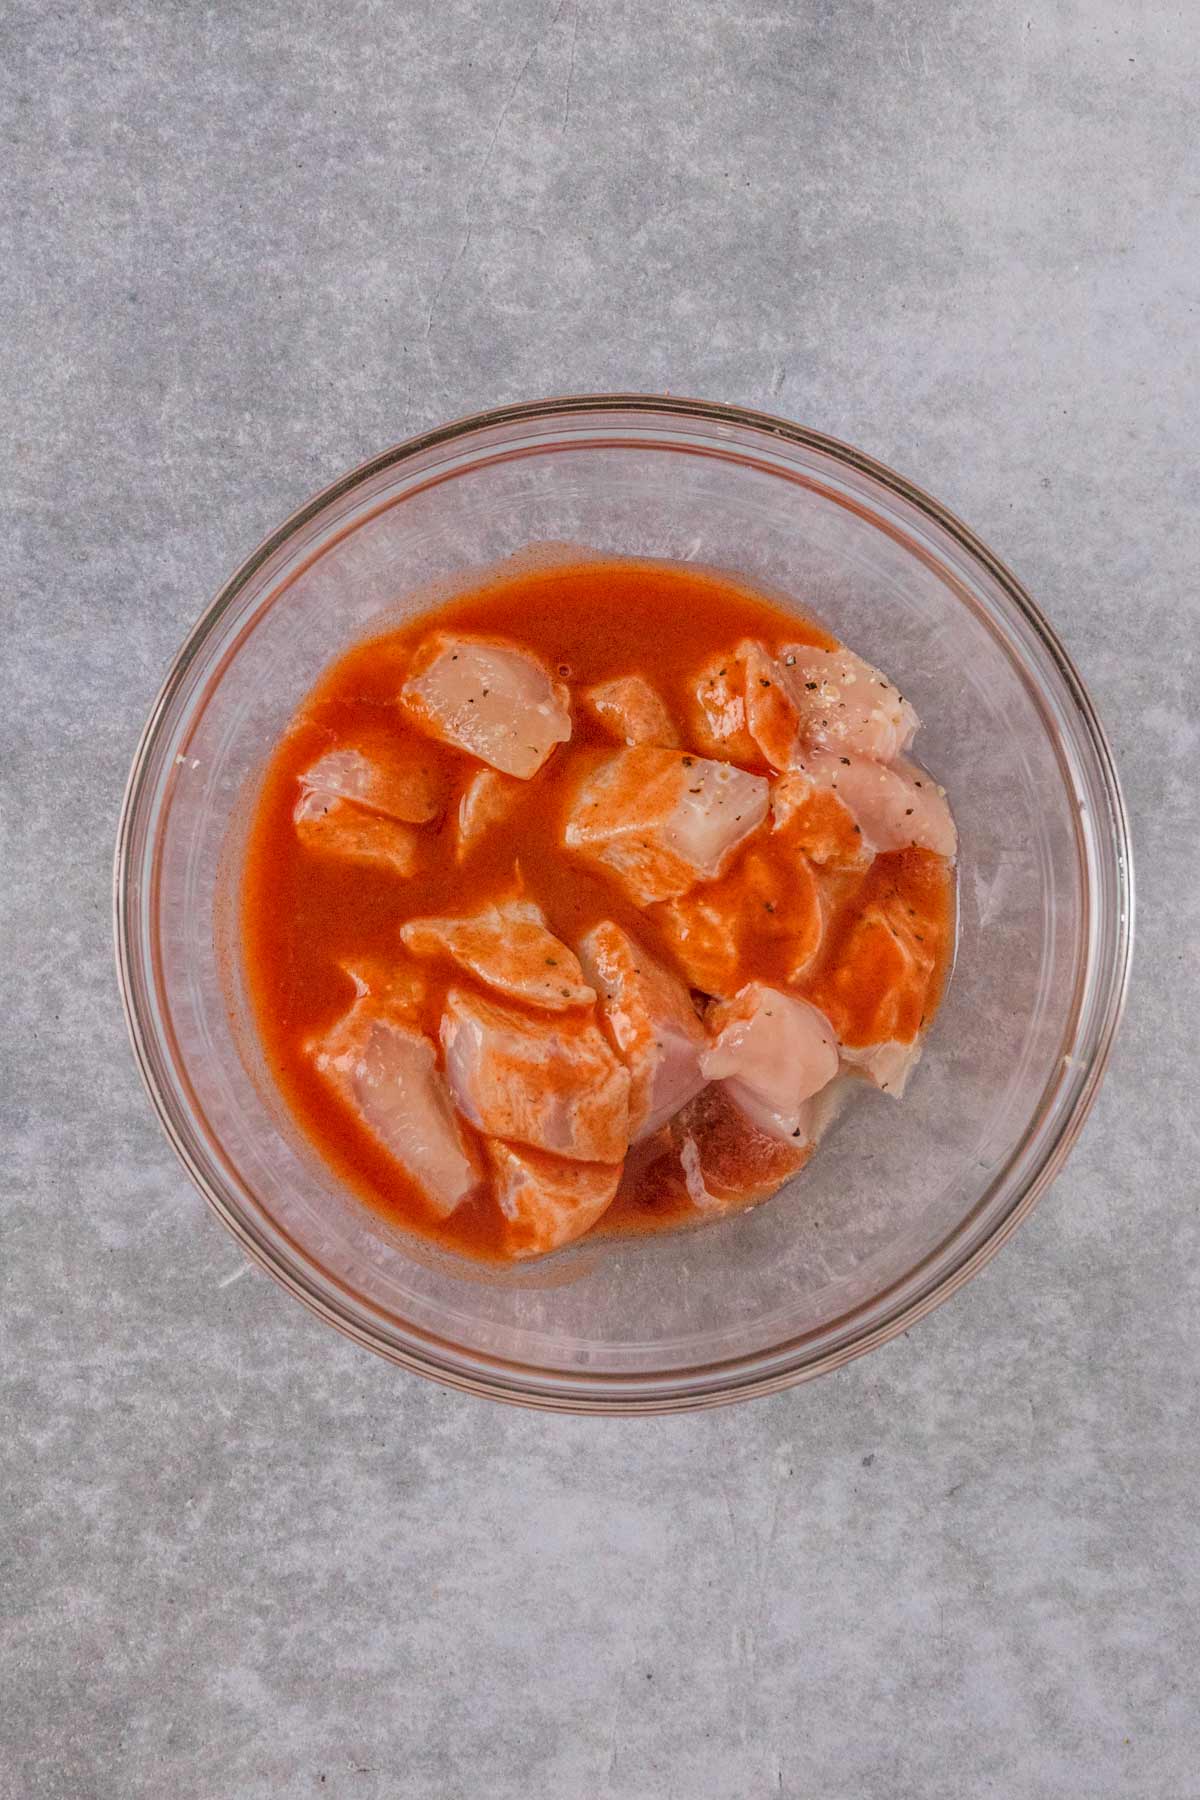 chicken pieces marinating in hot sauce